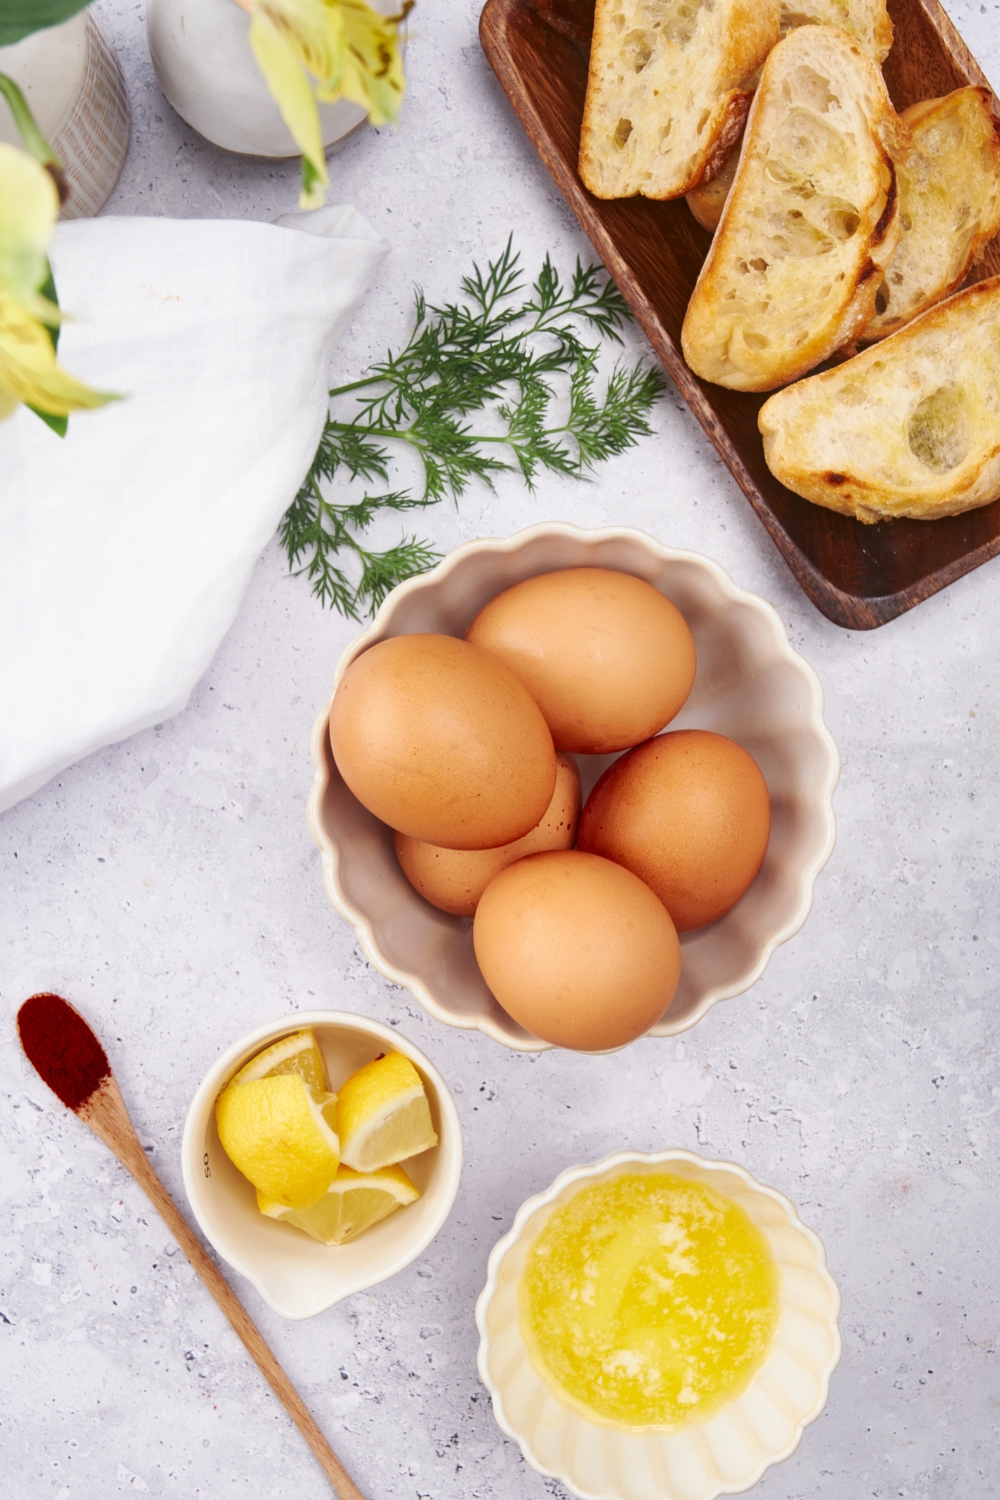 An assortment of ingredients including bowls of eggs, butter, lemon slices, a plate of toast, a sprig of dill, and a small spoon of cayenne pepper.